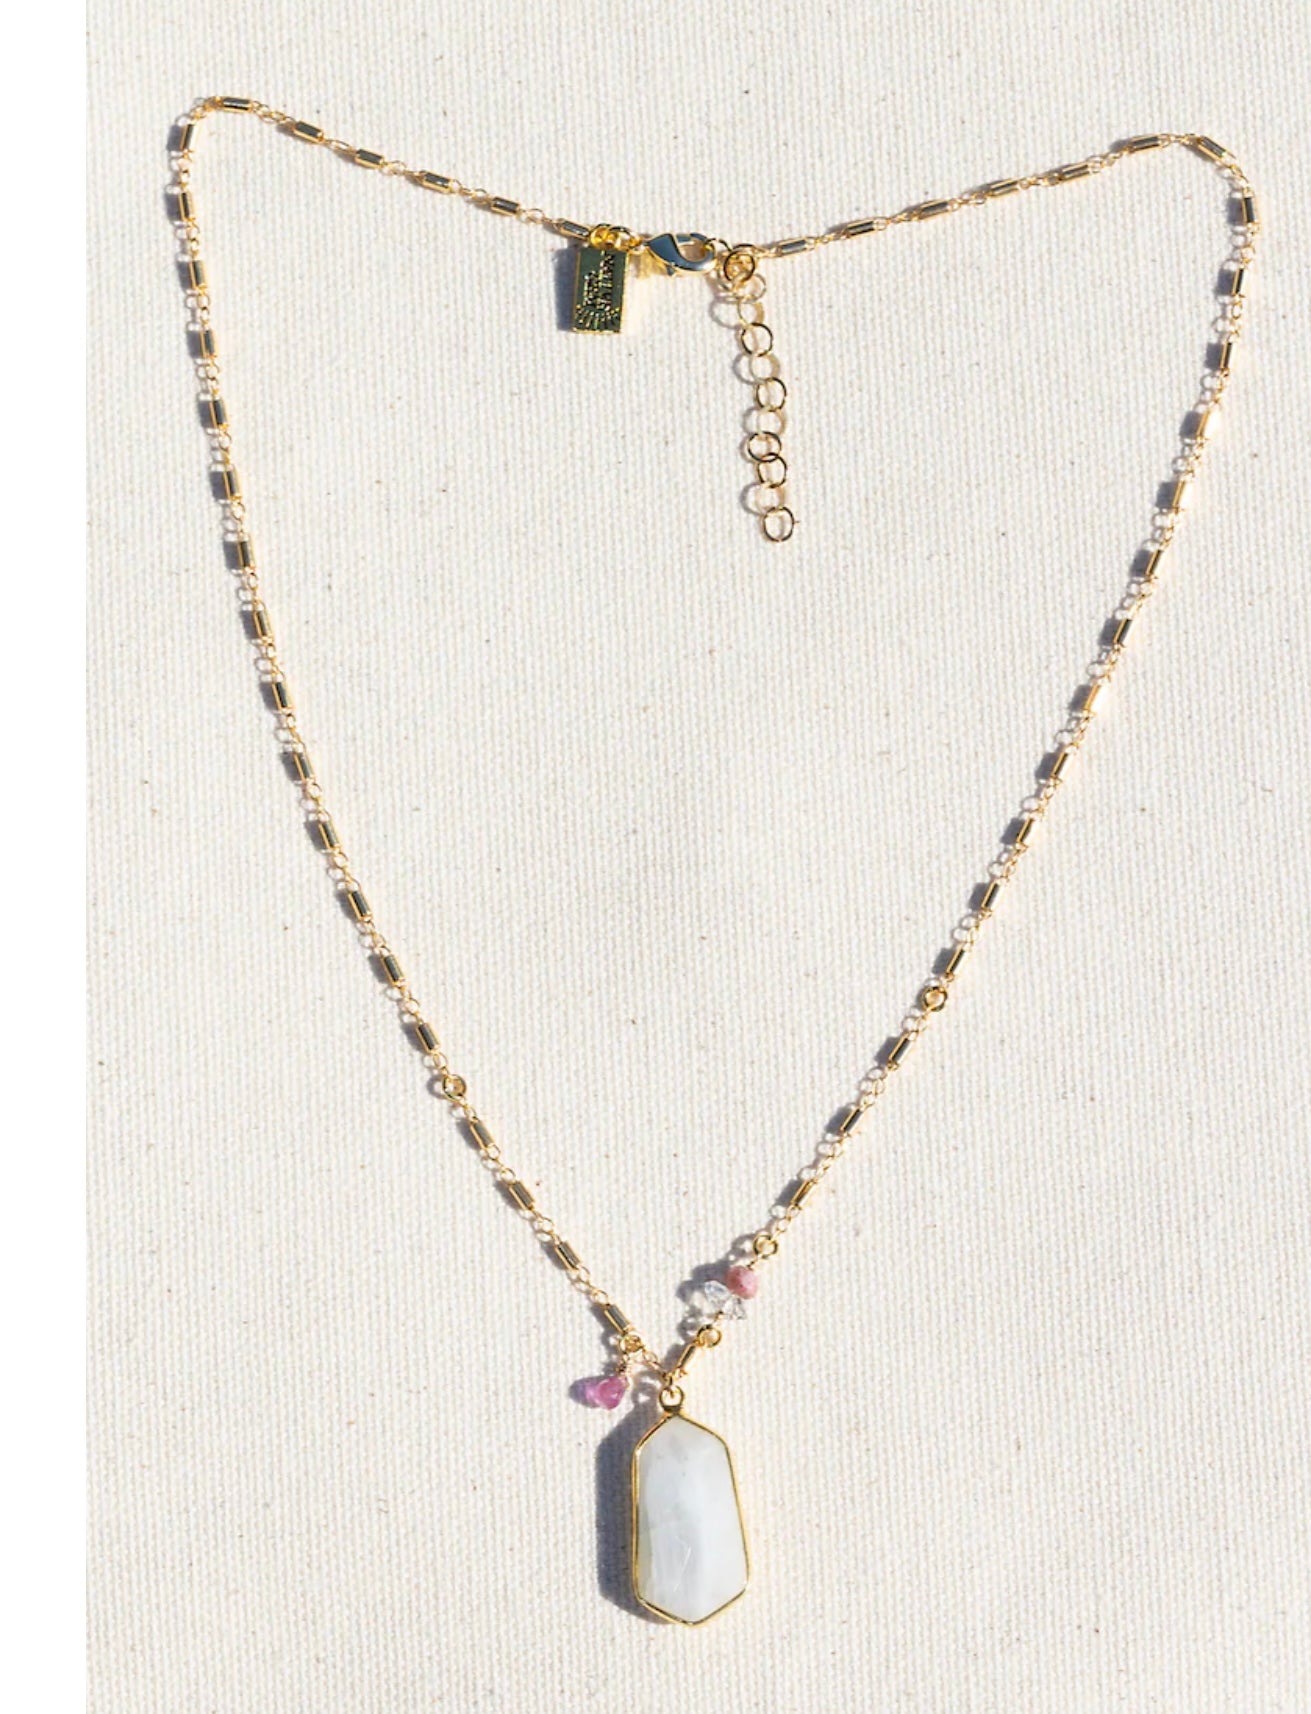 14K Goldfill 16"-18" Necklace Rainbow Moonstone,Pink Sapphire, Herkimer Crystal